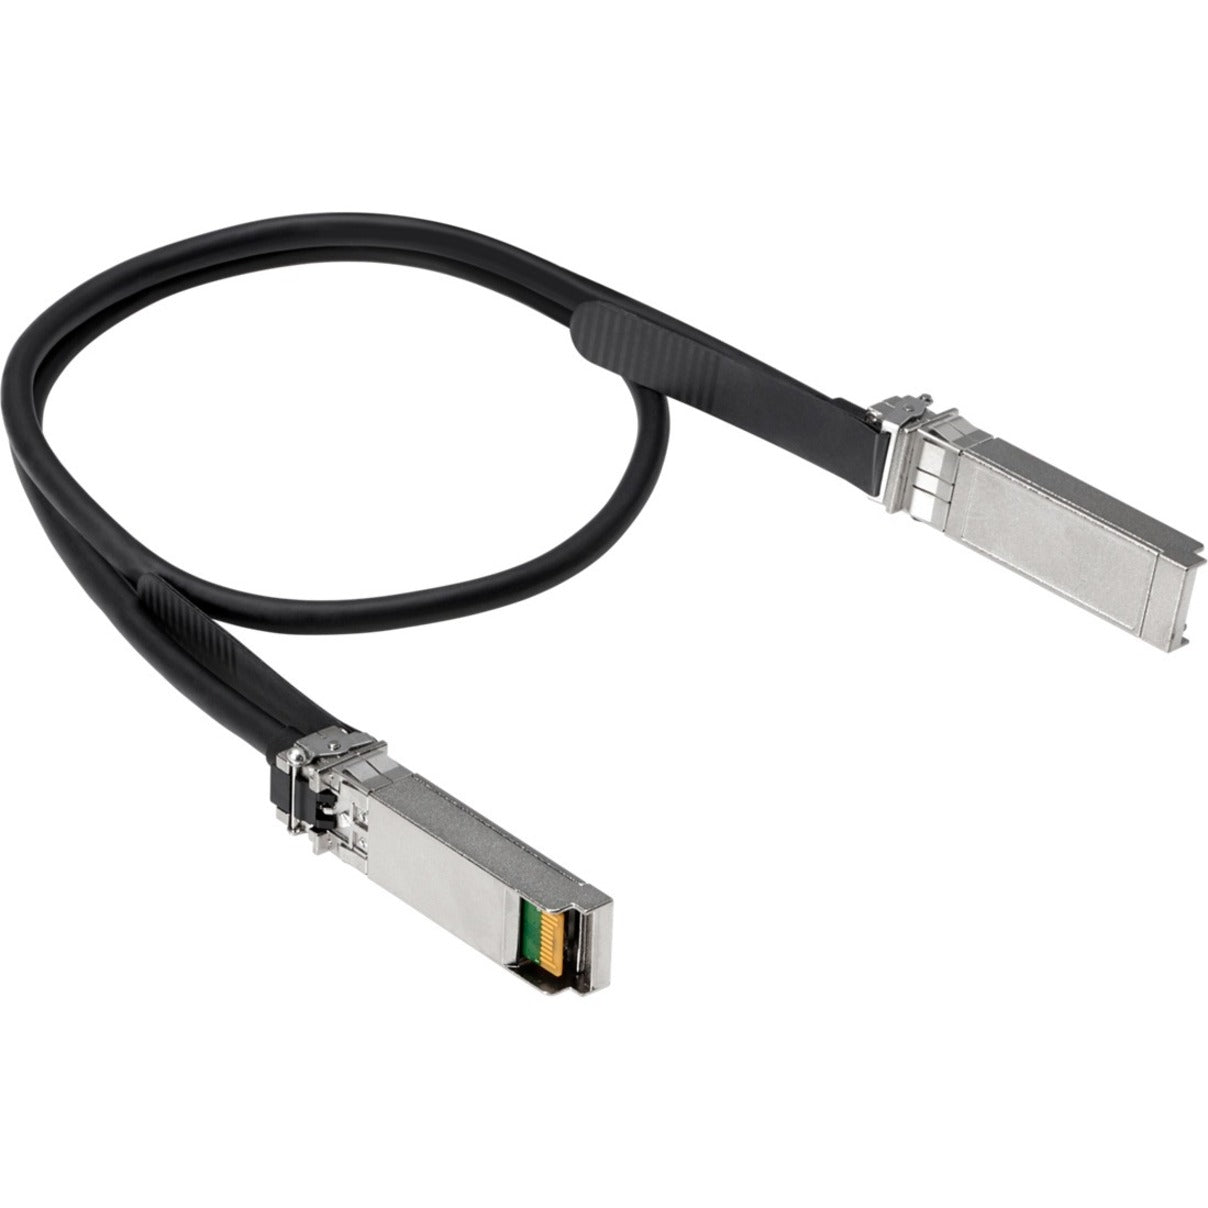 Aruba R0M46A 50G SFP56 to SFP56 0.65m Copper Cable, High-Speed Network Connection